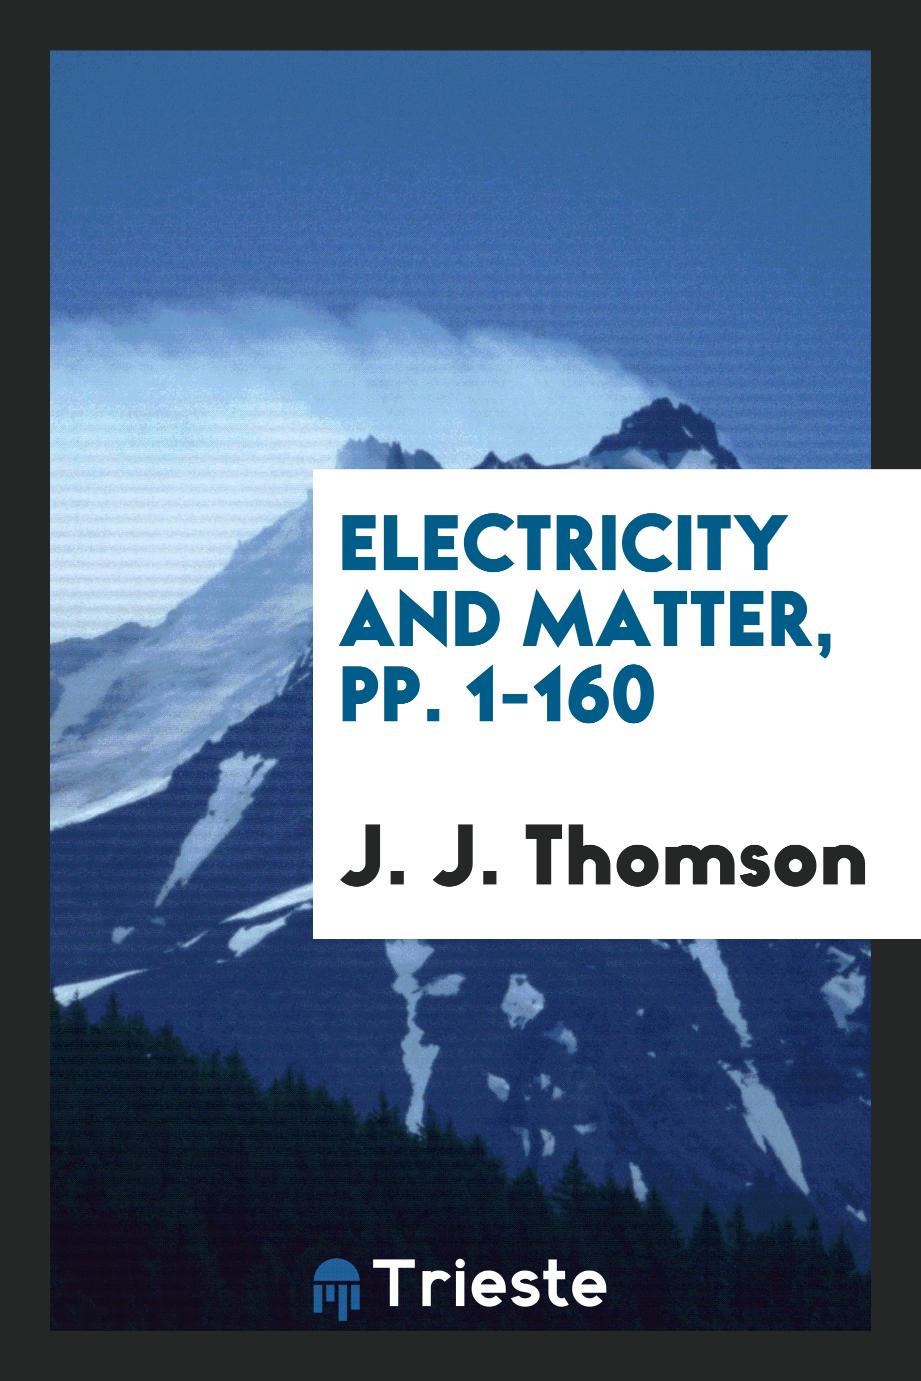 Electricity and Matter, pp. 1-160